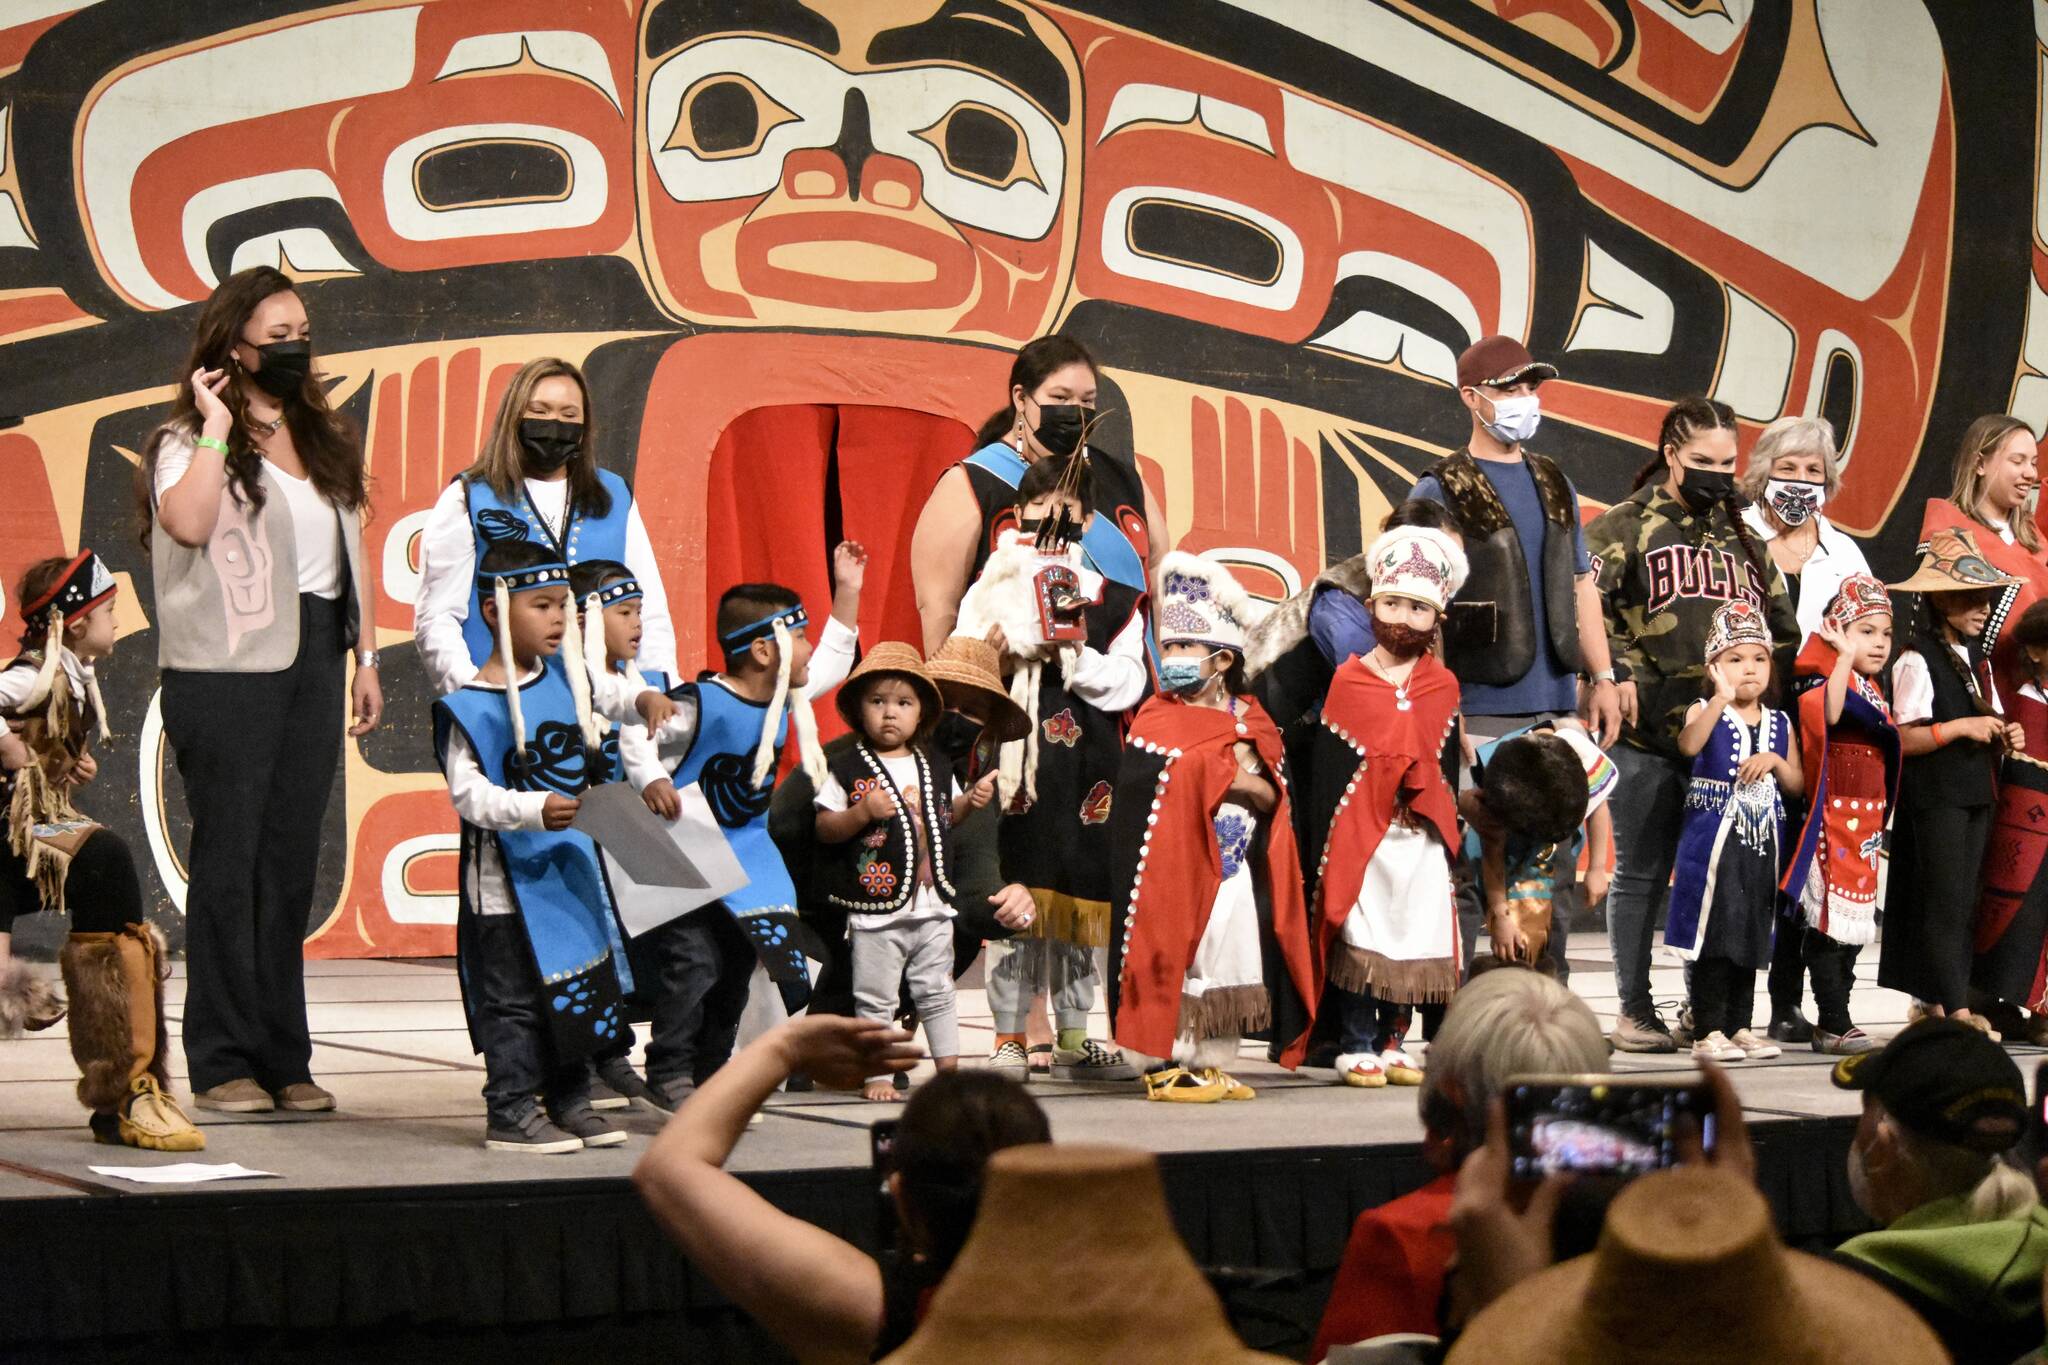 Performers and their families wave to the crowd at the end of the Toddler Regalia Review at Centennial Hall on Friday, June 10, 2022, part of Celebration 2022. Performers were aged 2-5, and wore regalia made for them by friends and family. (Peter Segall / Juneau Empire)